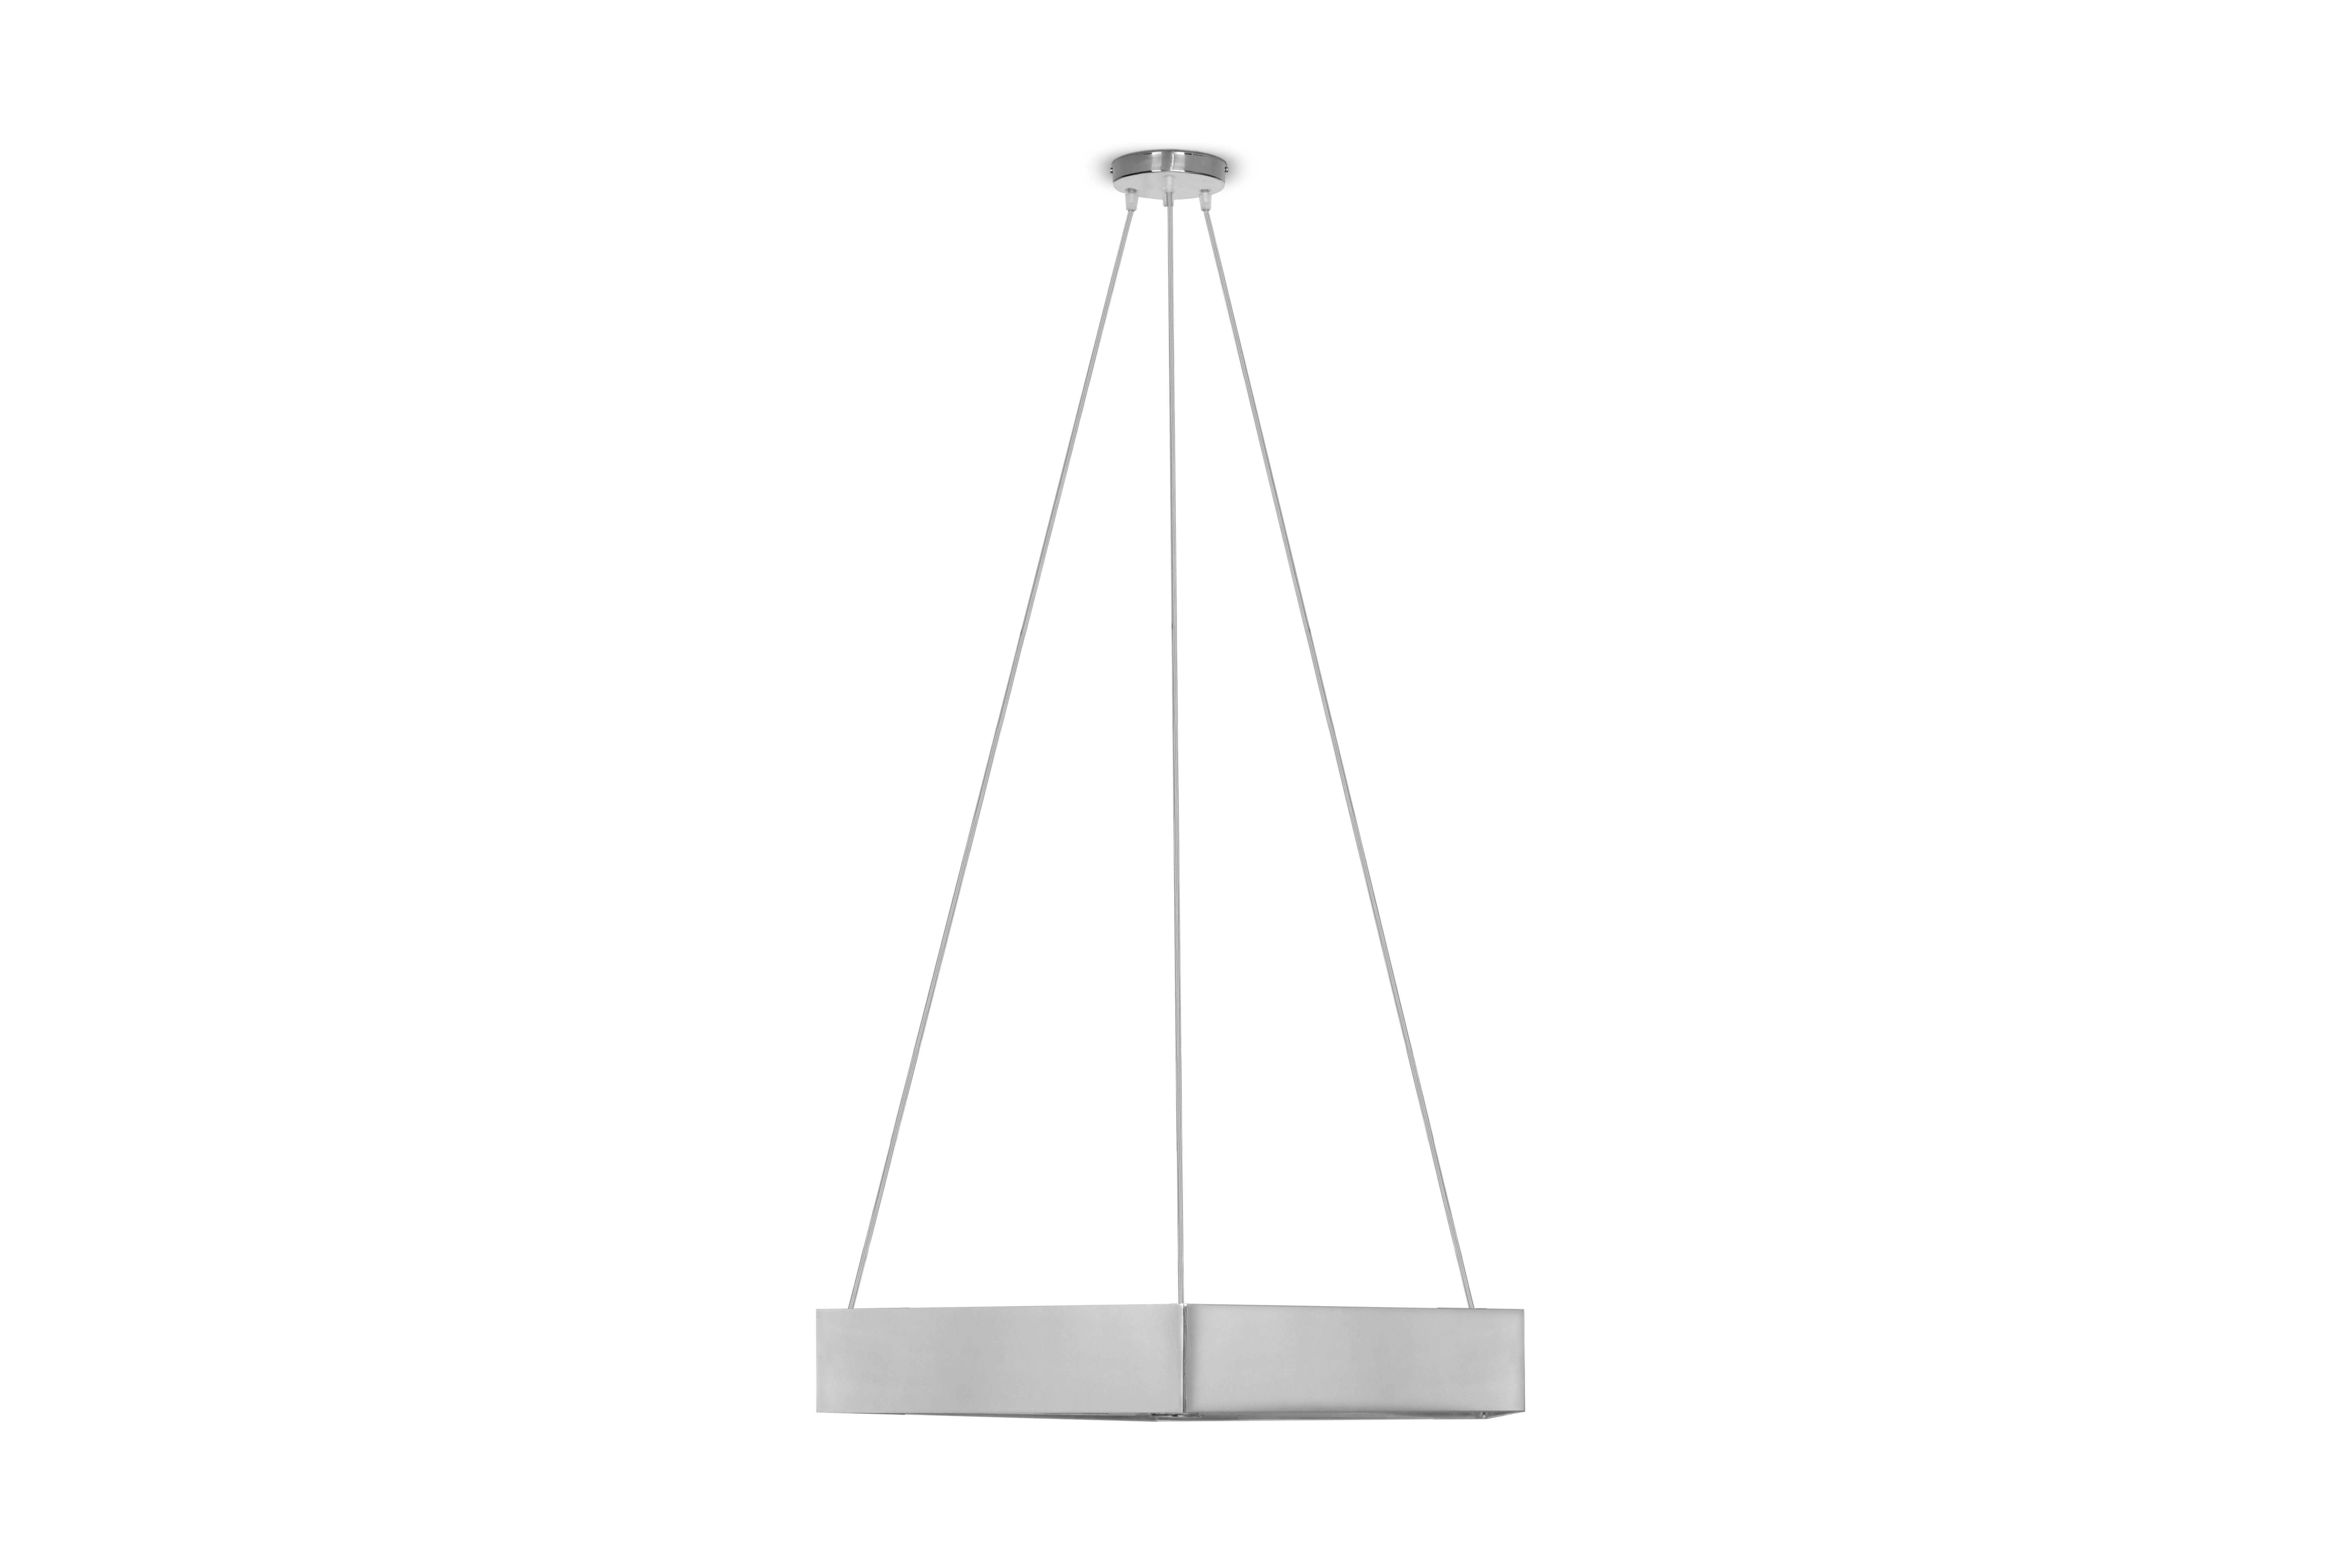 Honeybee ceiling lamp, Royal Stranger
Dimensions: 16 x 80 x 83 cm 
The total height is adjustable.
Material: Brass (also available in Copper or Stainless Steel in polished or brushed finish.).

A suspended element with hexagonal shape